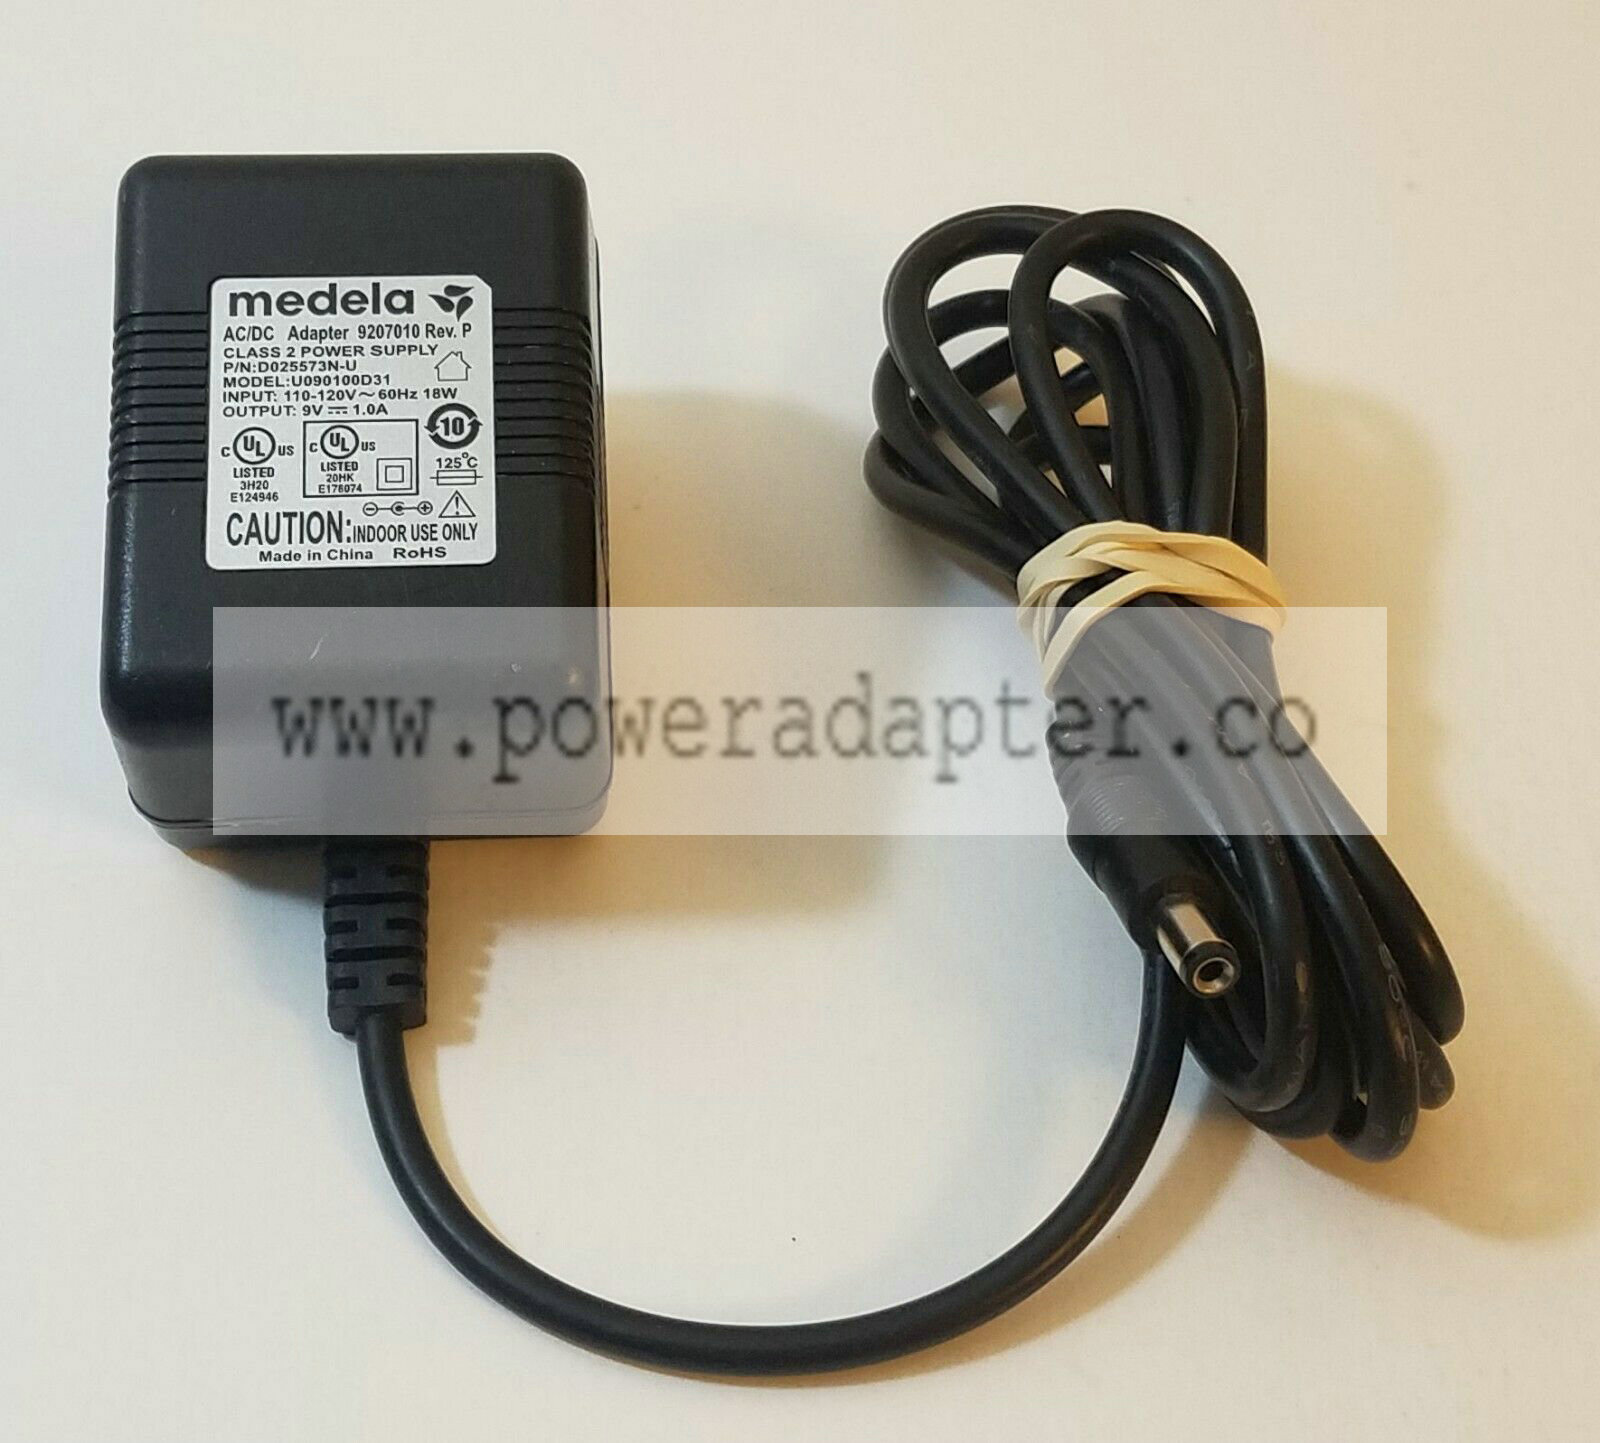 Genuine Medela U090100D31 AC Adapter Power Supply 920.7010 9V 1.0A Breast Pump I offer combined shipping discounts, p